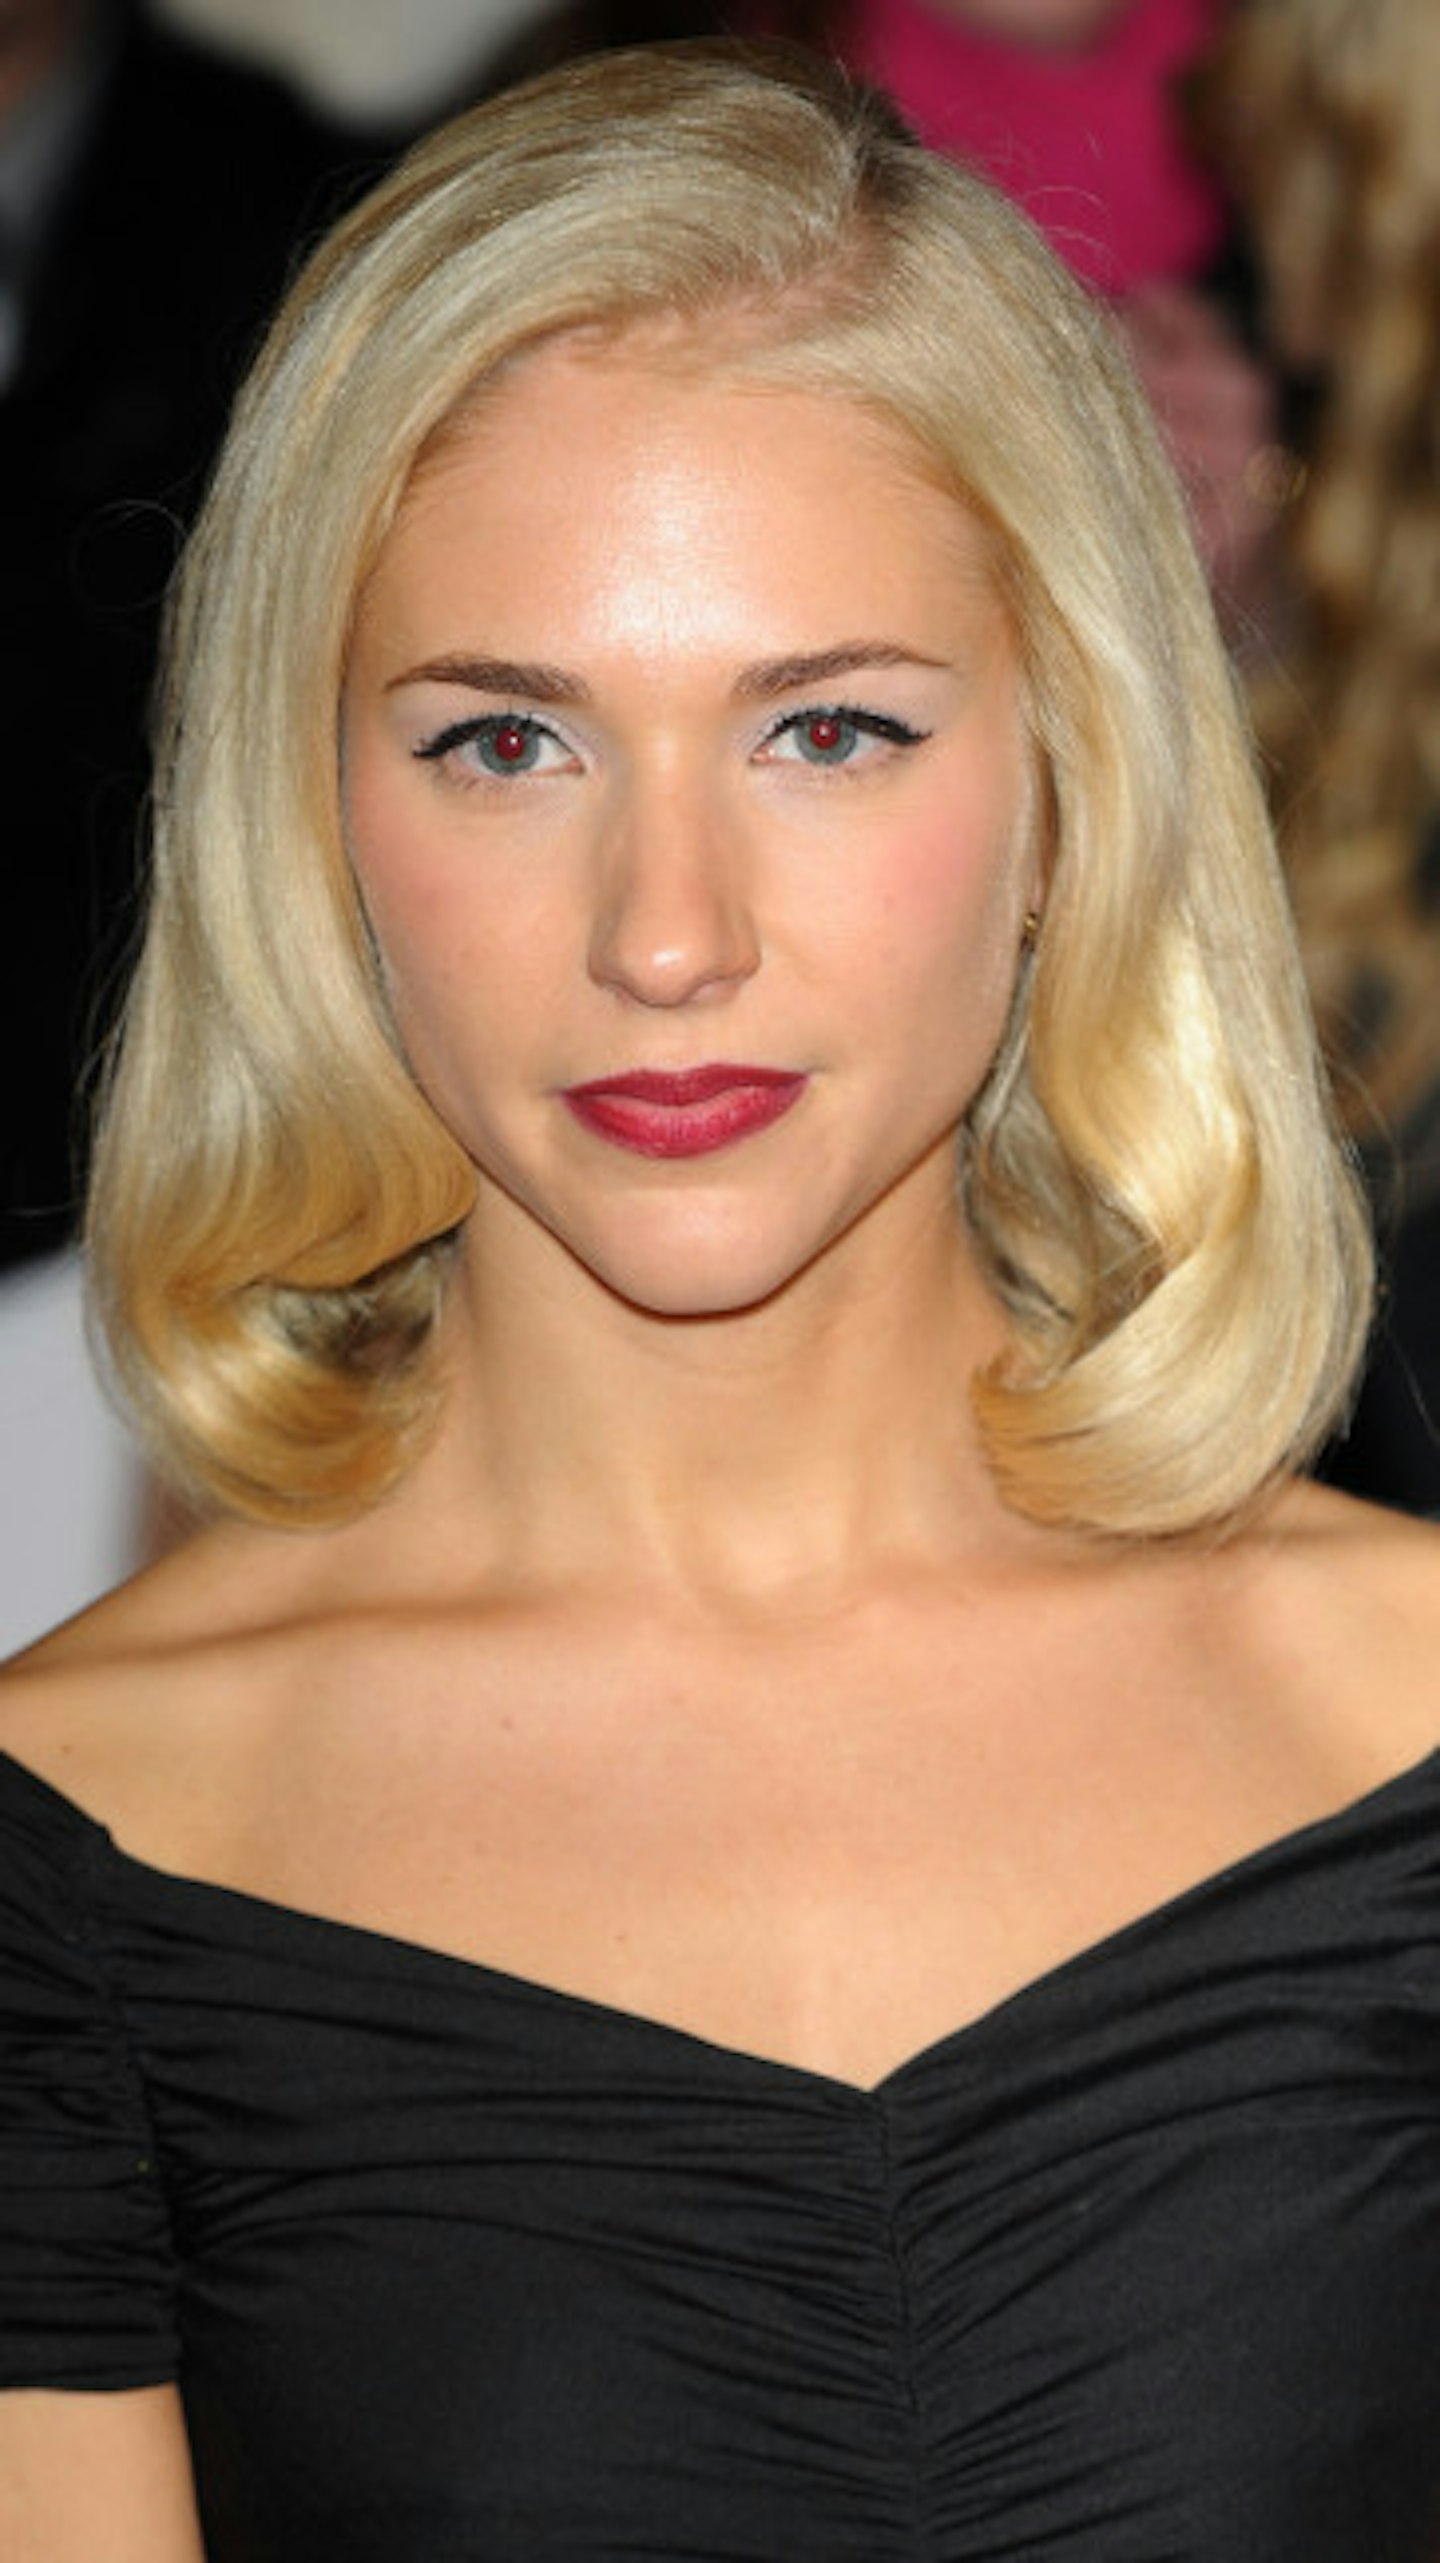 EXCLUSIVE: Maddy Hill talks EastEnders, Danny Dyer and Living Below The Line